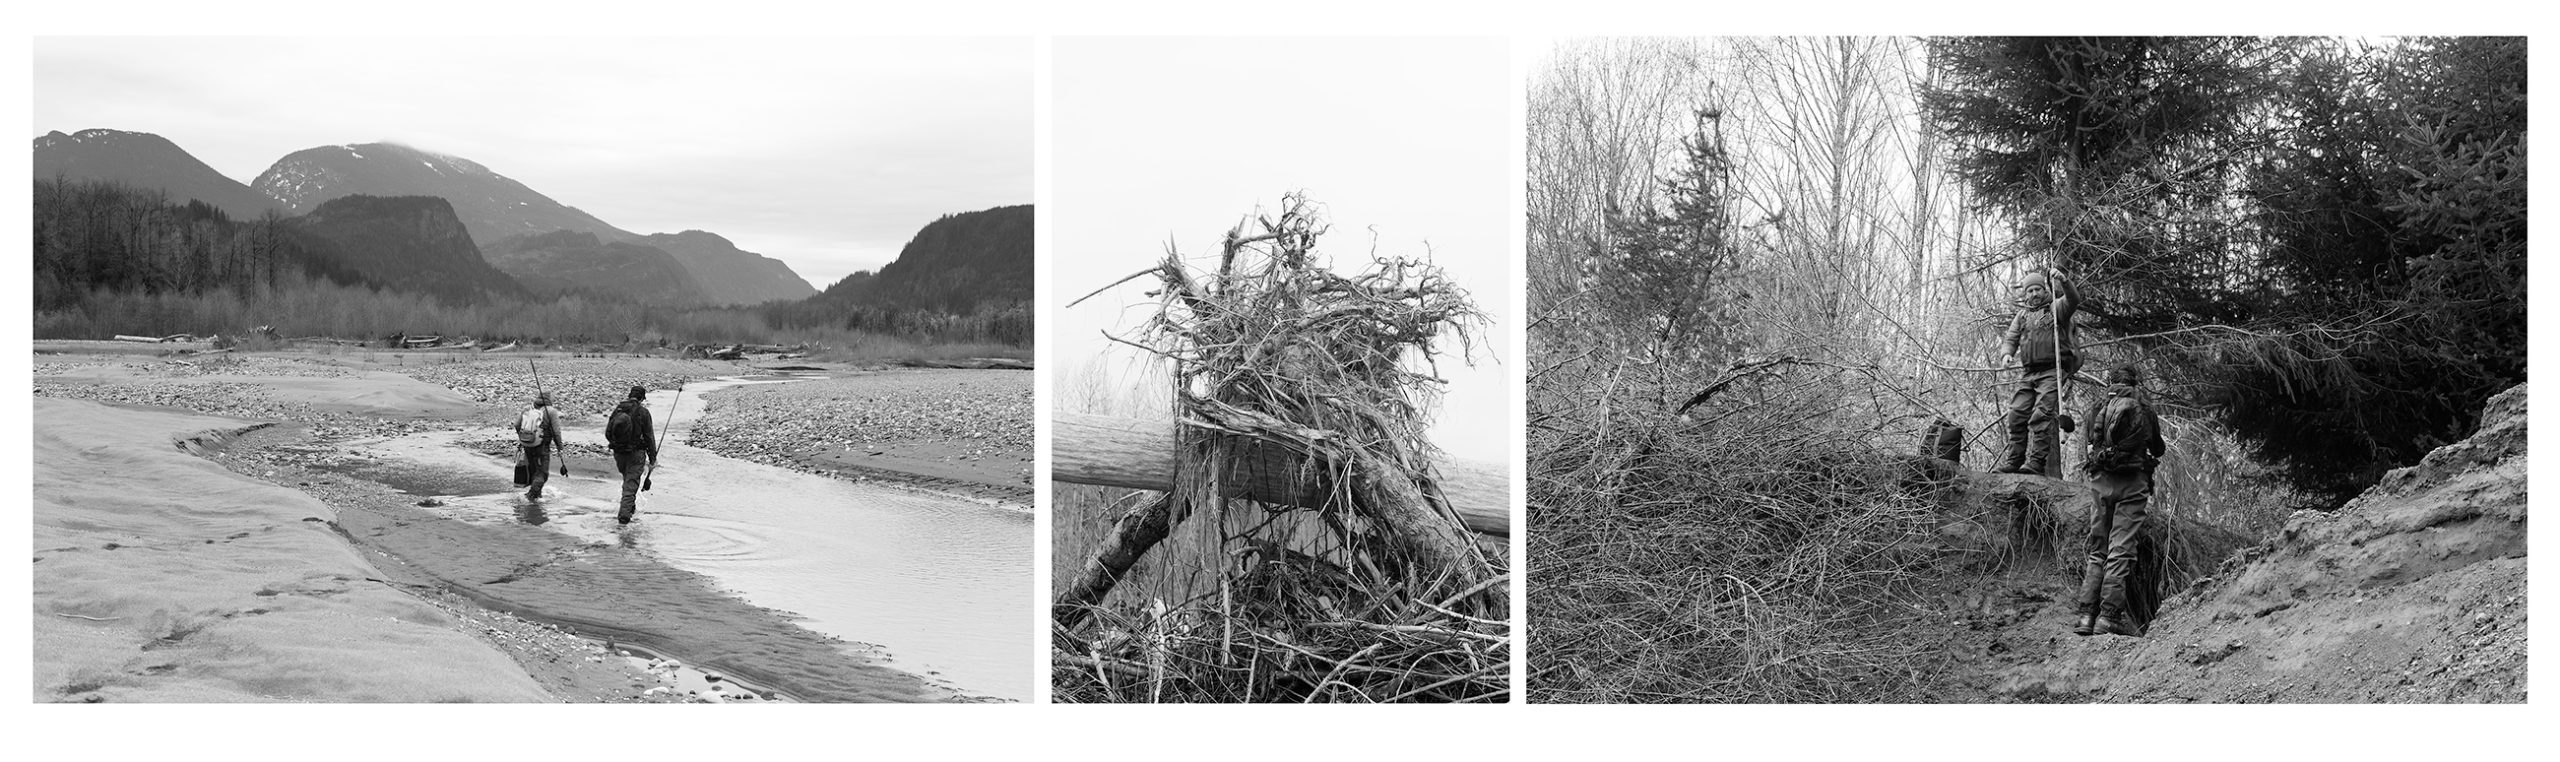 A black and white triptych of fishermen walking along the river, an old root ball and a climb up a dirt slope.